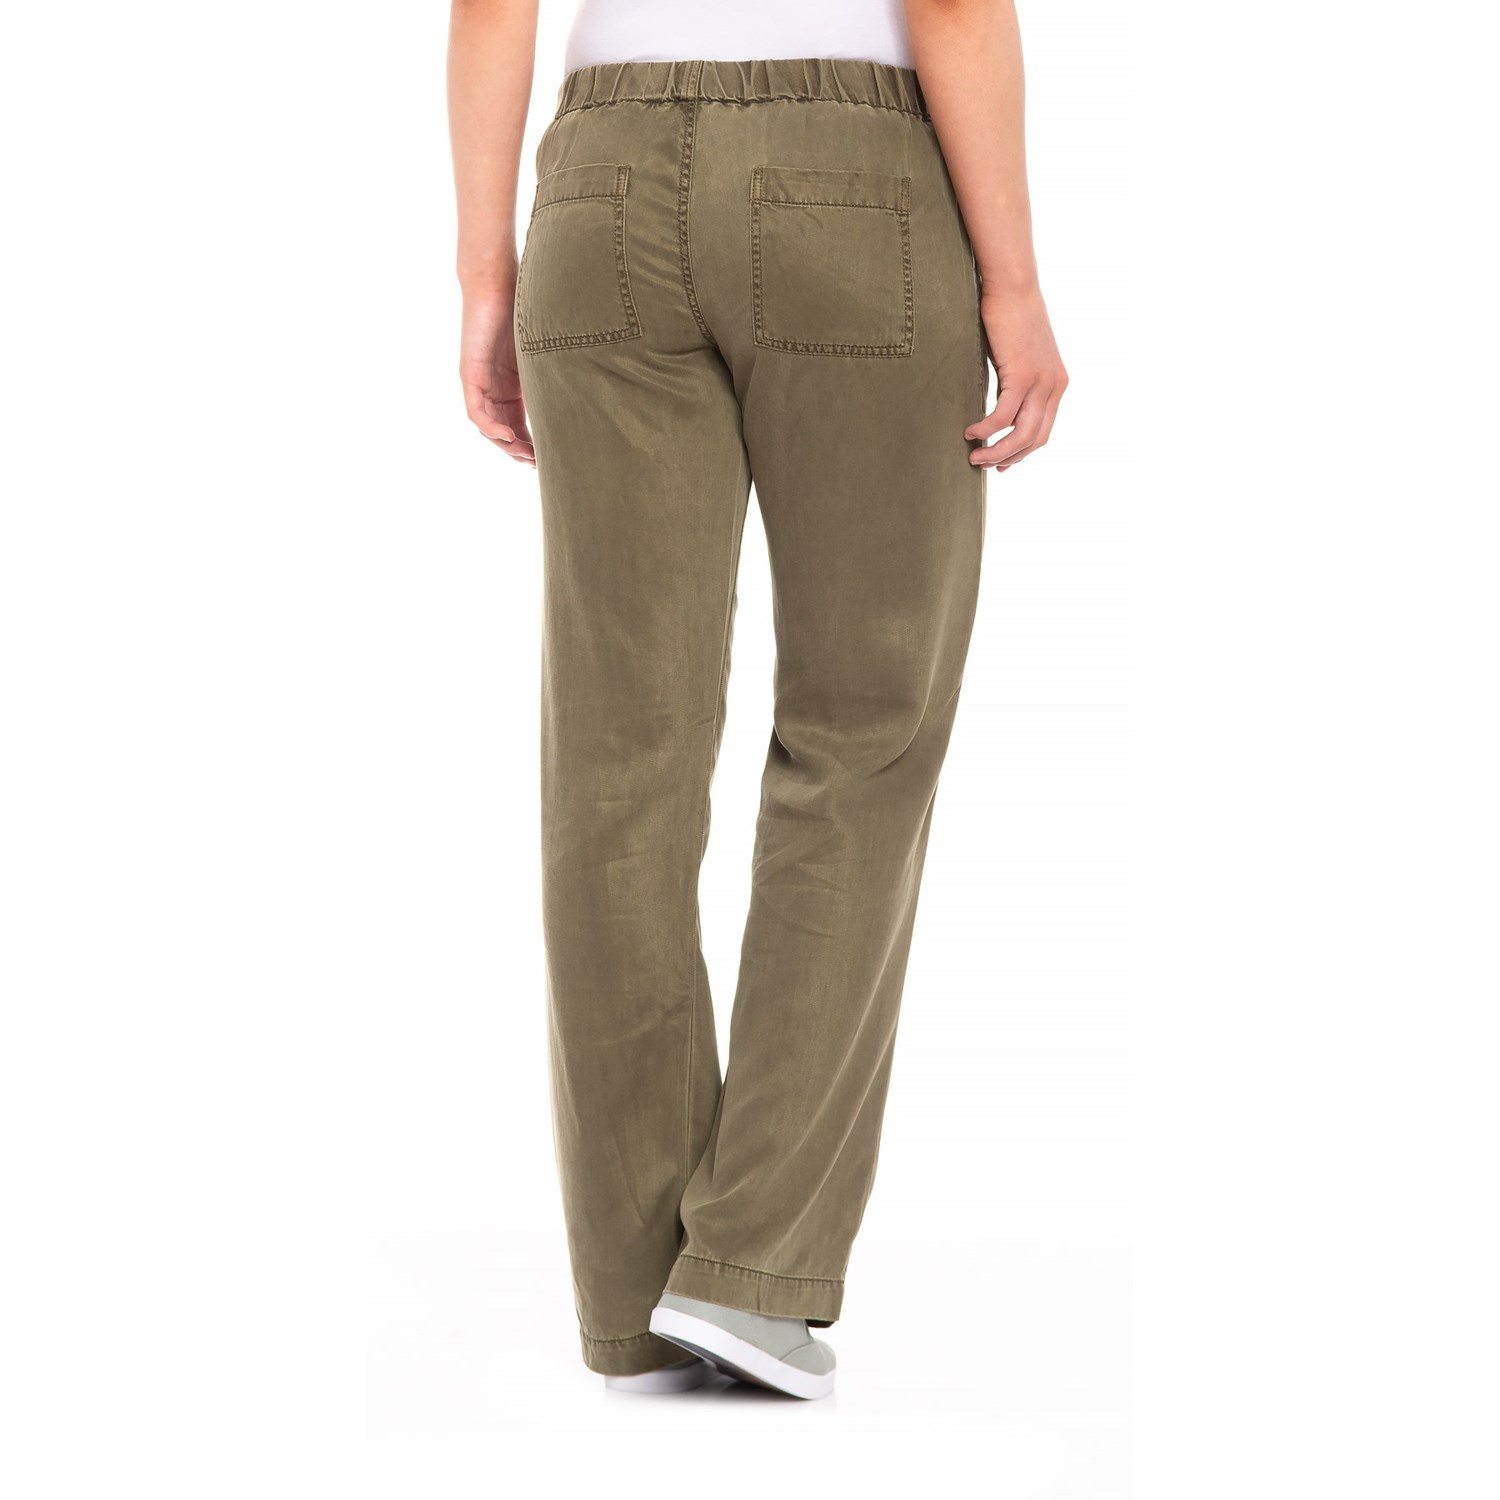 Max Jeans Olive TENCEL® Pants (For Women) - Save 60%